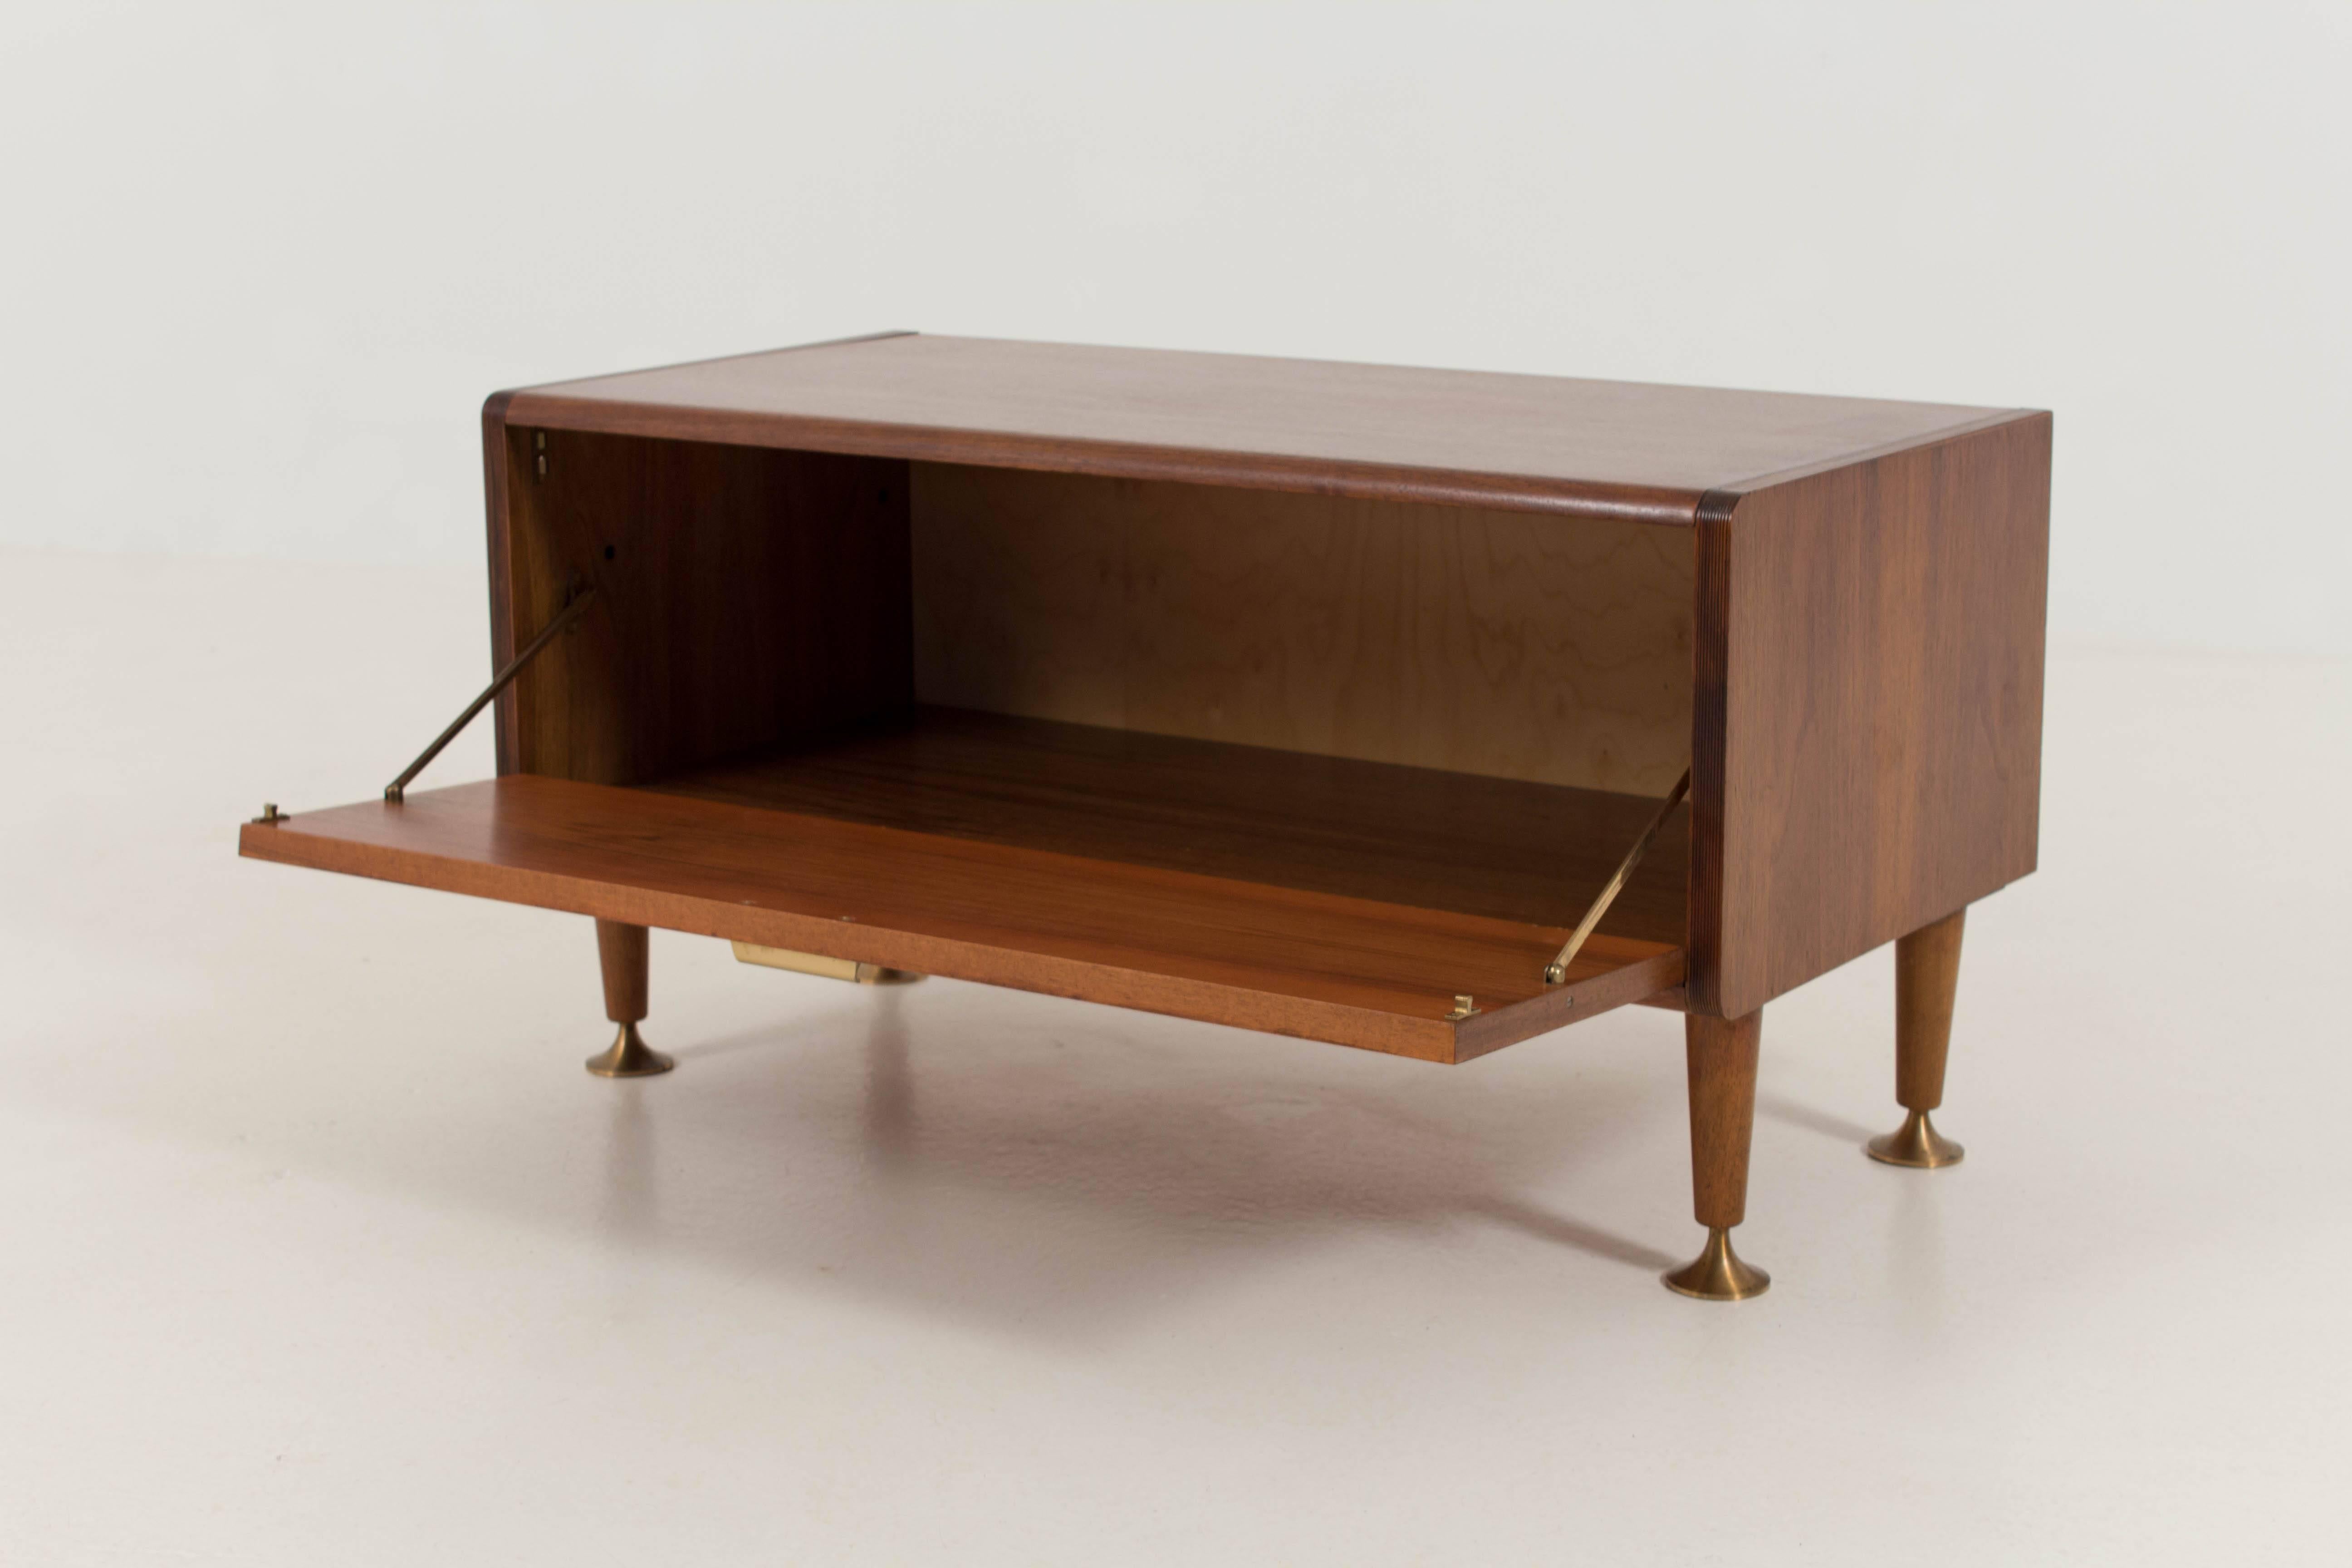 Stylish walnut Mid-Century Modern flat screen credenza by A.A. Patijn for
Poly-Z, 1960s.
Solid brass feet.
In good original condition with minor wear consistent with age and use,
preserving a beautiful patina.